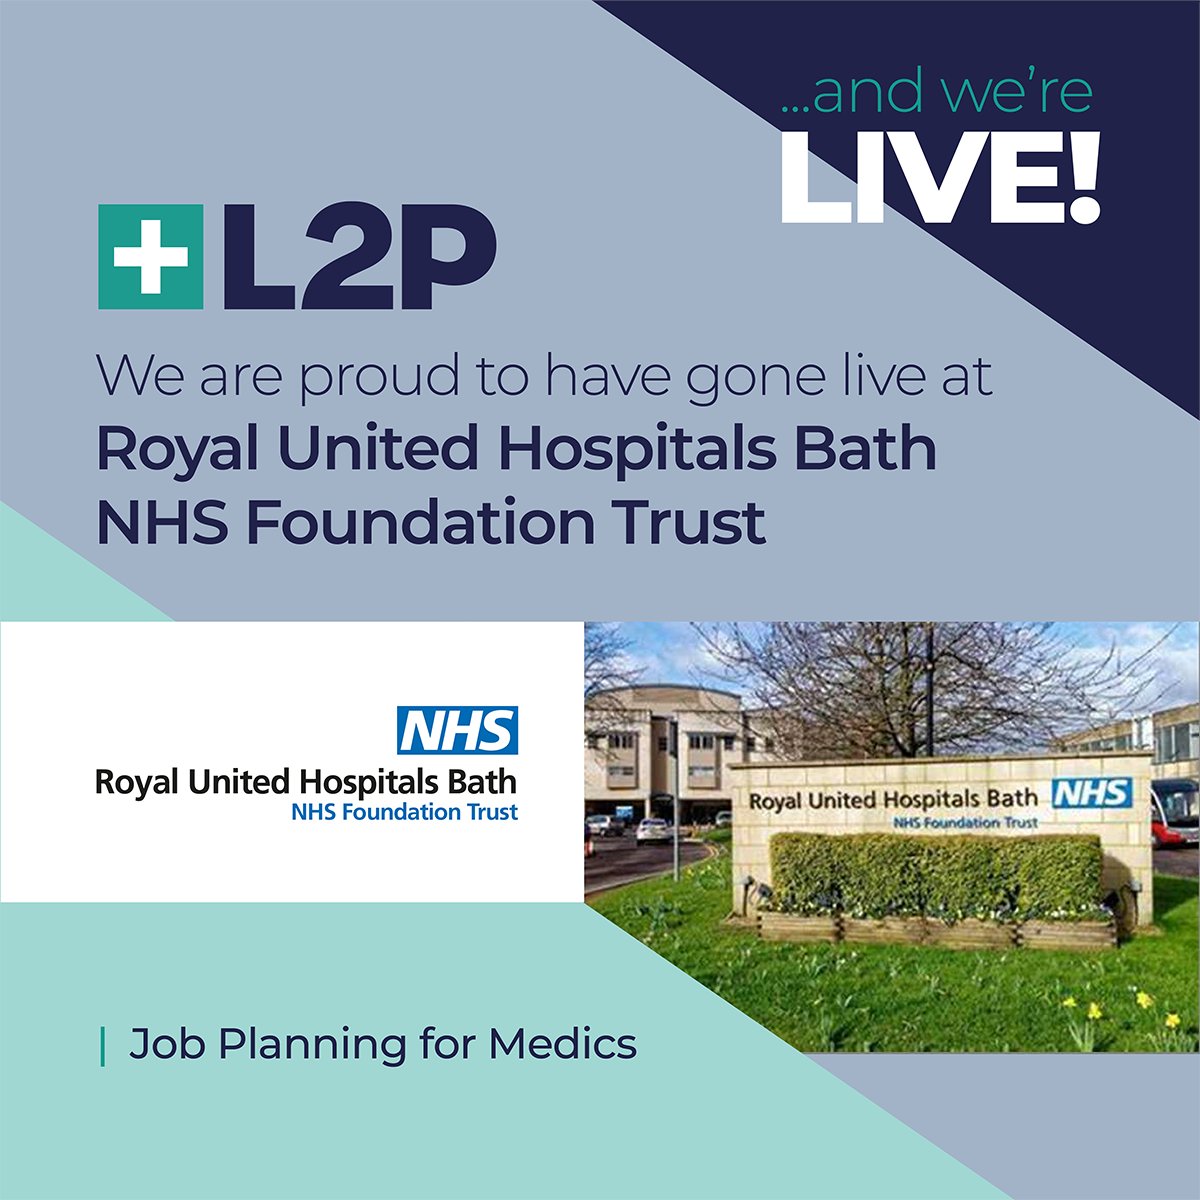 L2P Enterprise Ltd is delighted to be working with Royal United Hospitals Bath NHS Foundation Trust, and we are even more excited to be live with electronic medics job planning.
#nhs #nhsworkforce #l2p #jobplanning #nhsdigital